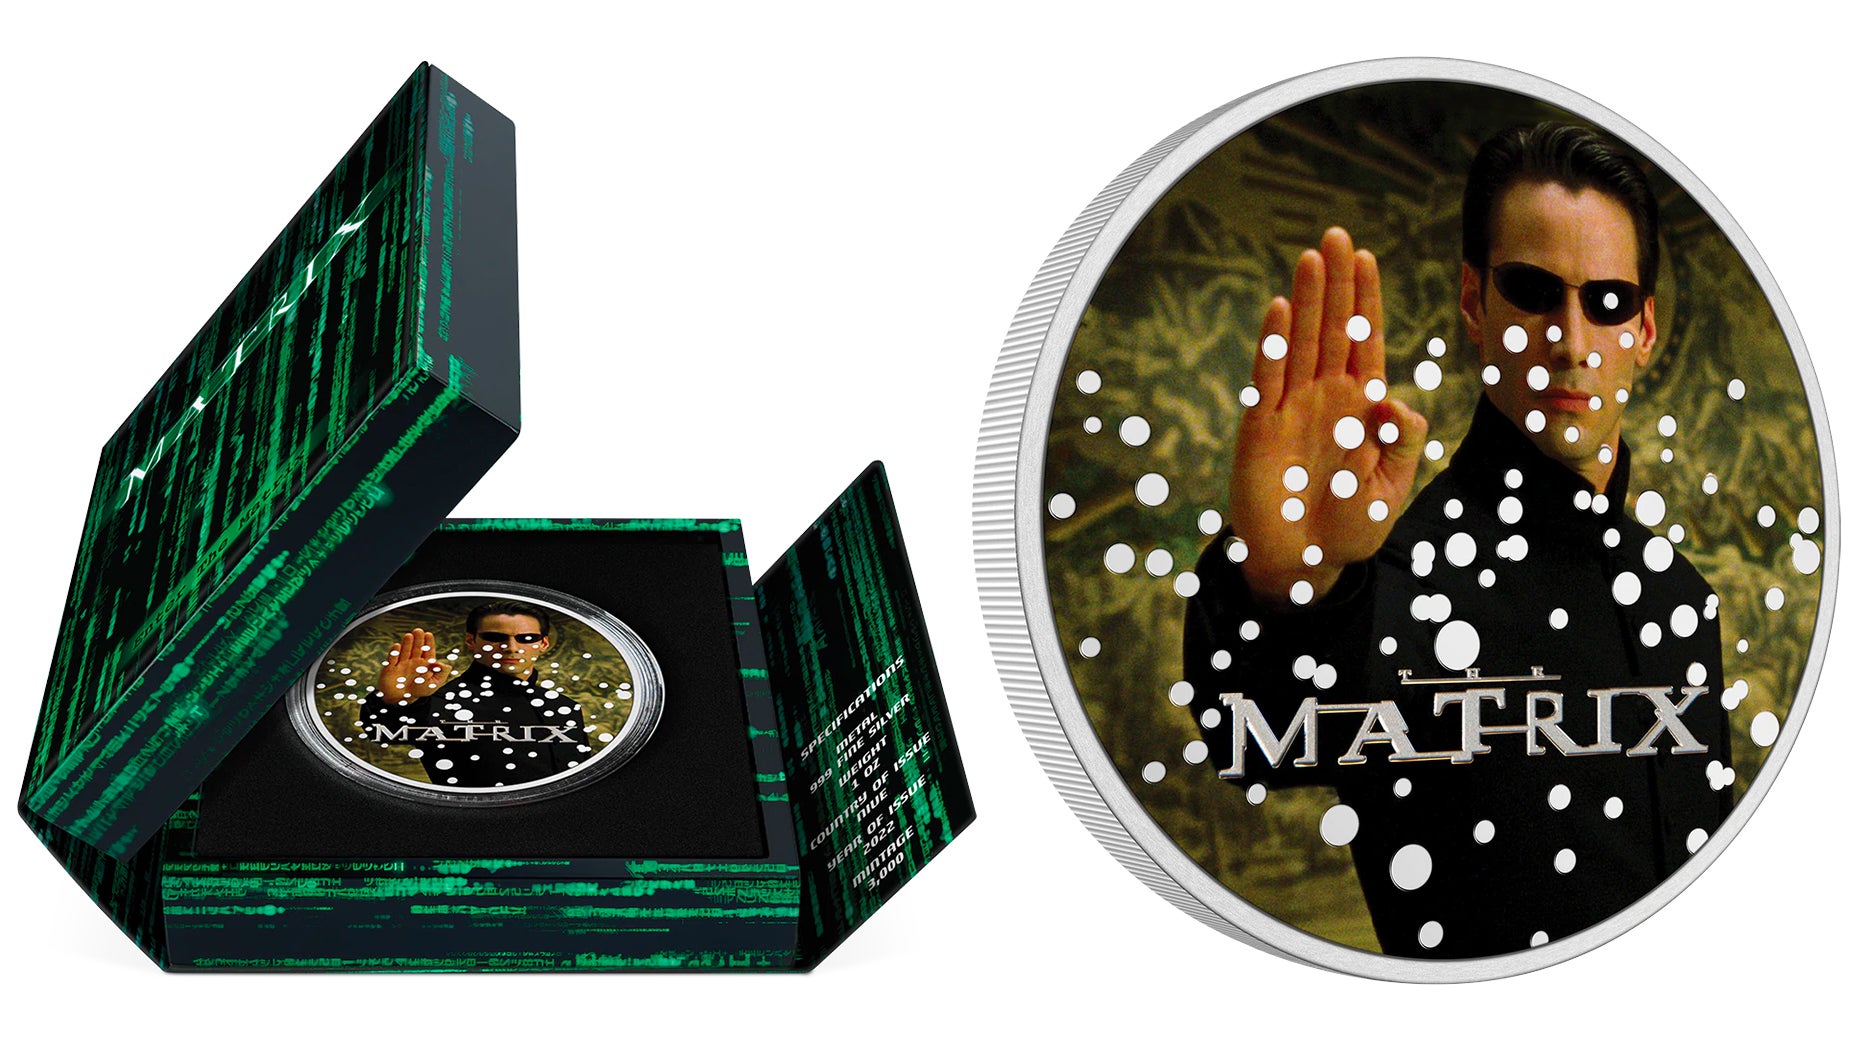 The New Zealand Mint Sells Some of the Most Over-the-Top Pop Culture Inspired Collectible Coins